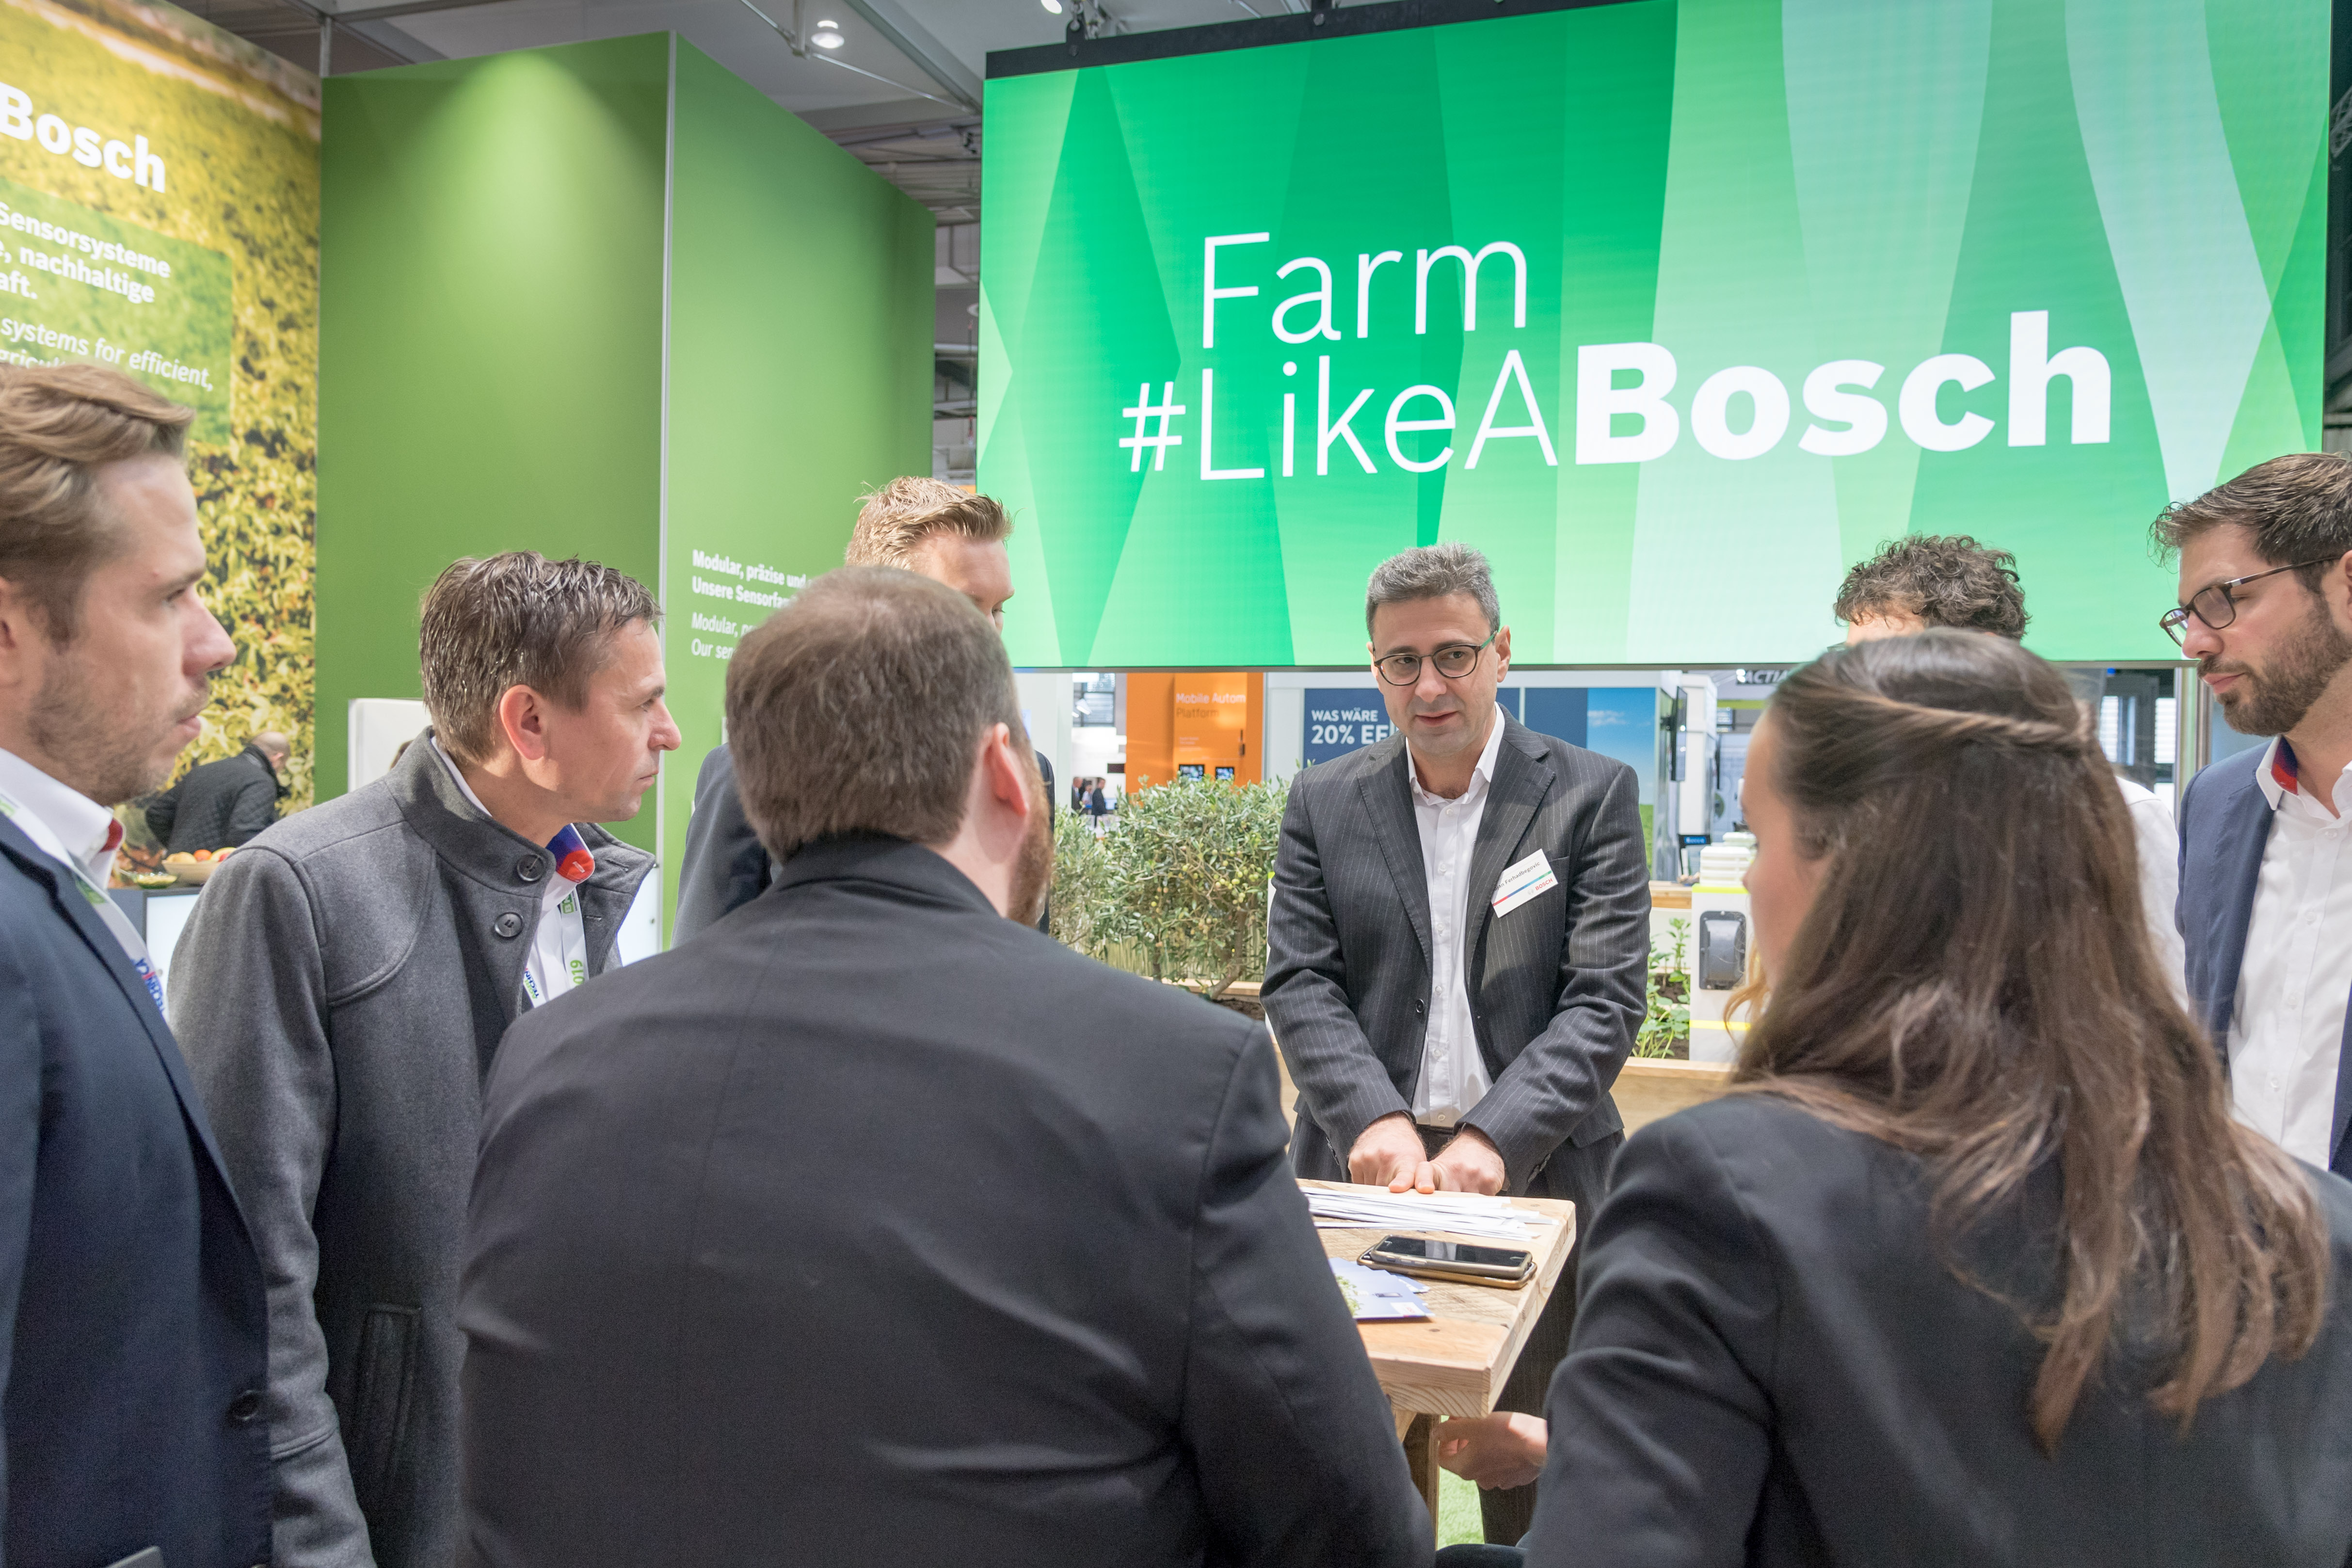 Farm #LikeABosch – everything for the farmer in one app